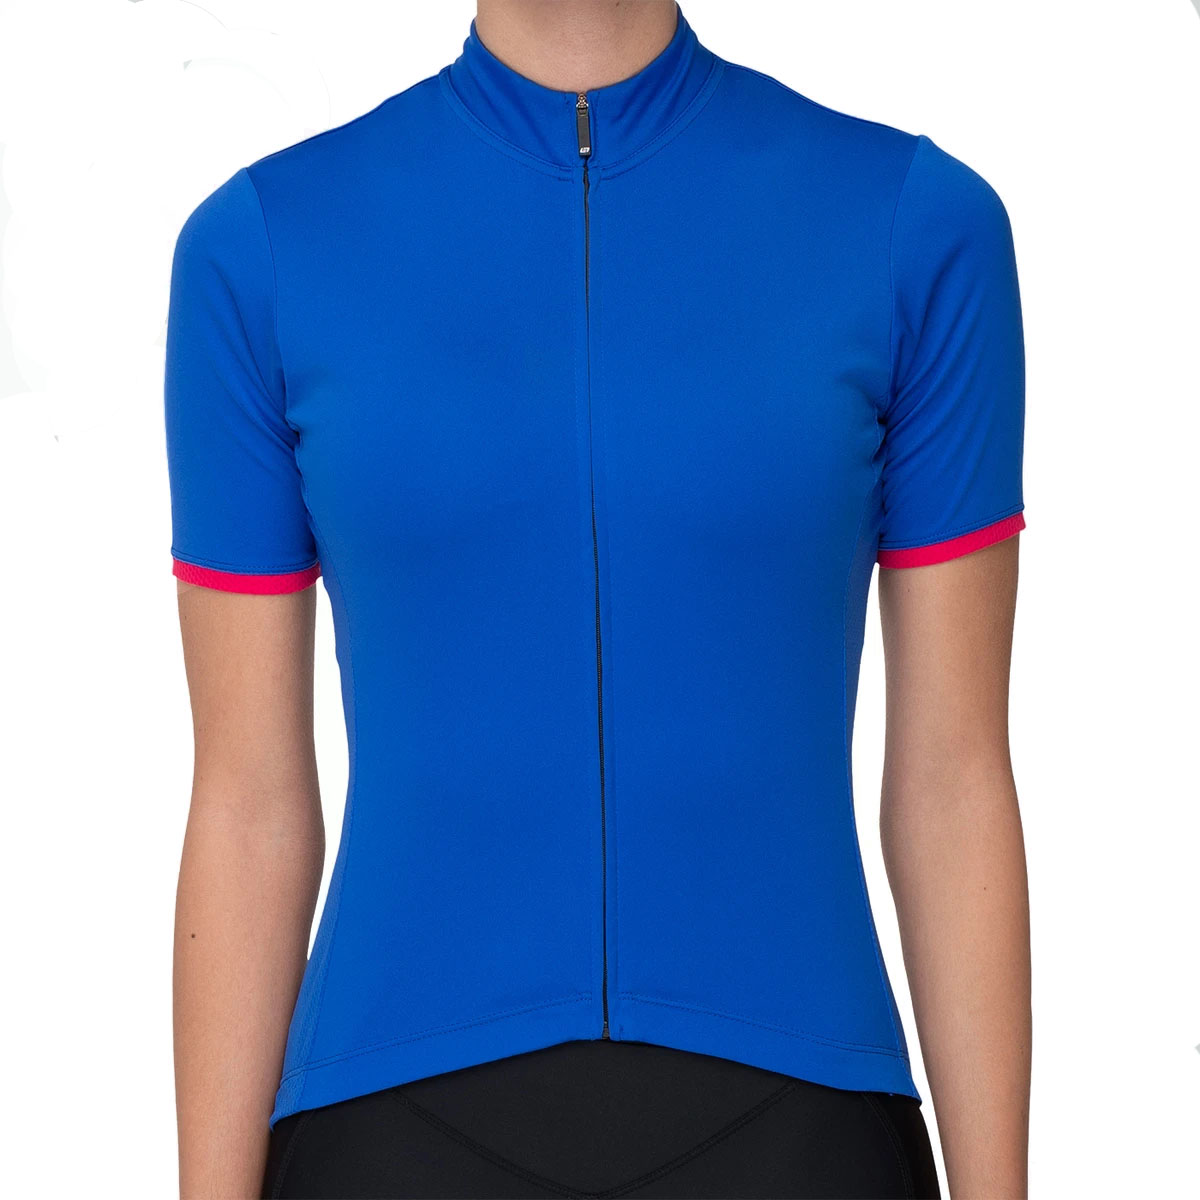 Details about   Bellwether Pro Mesh Men's Cycling Jersey 